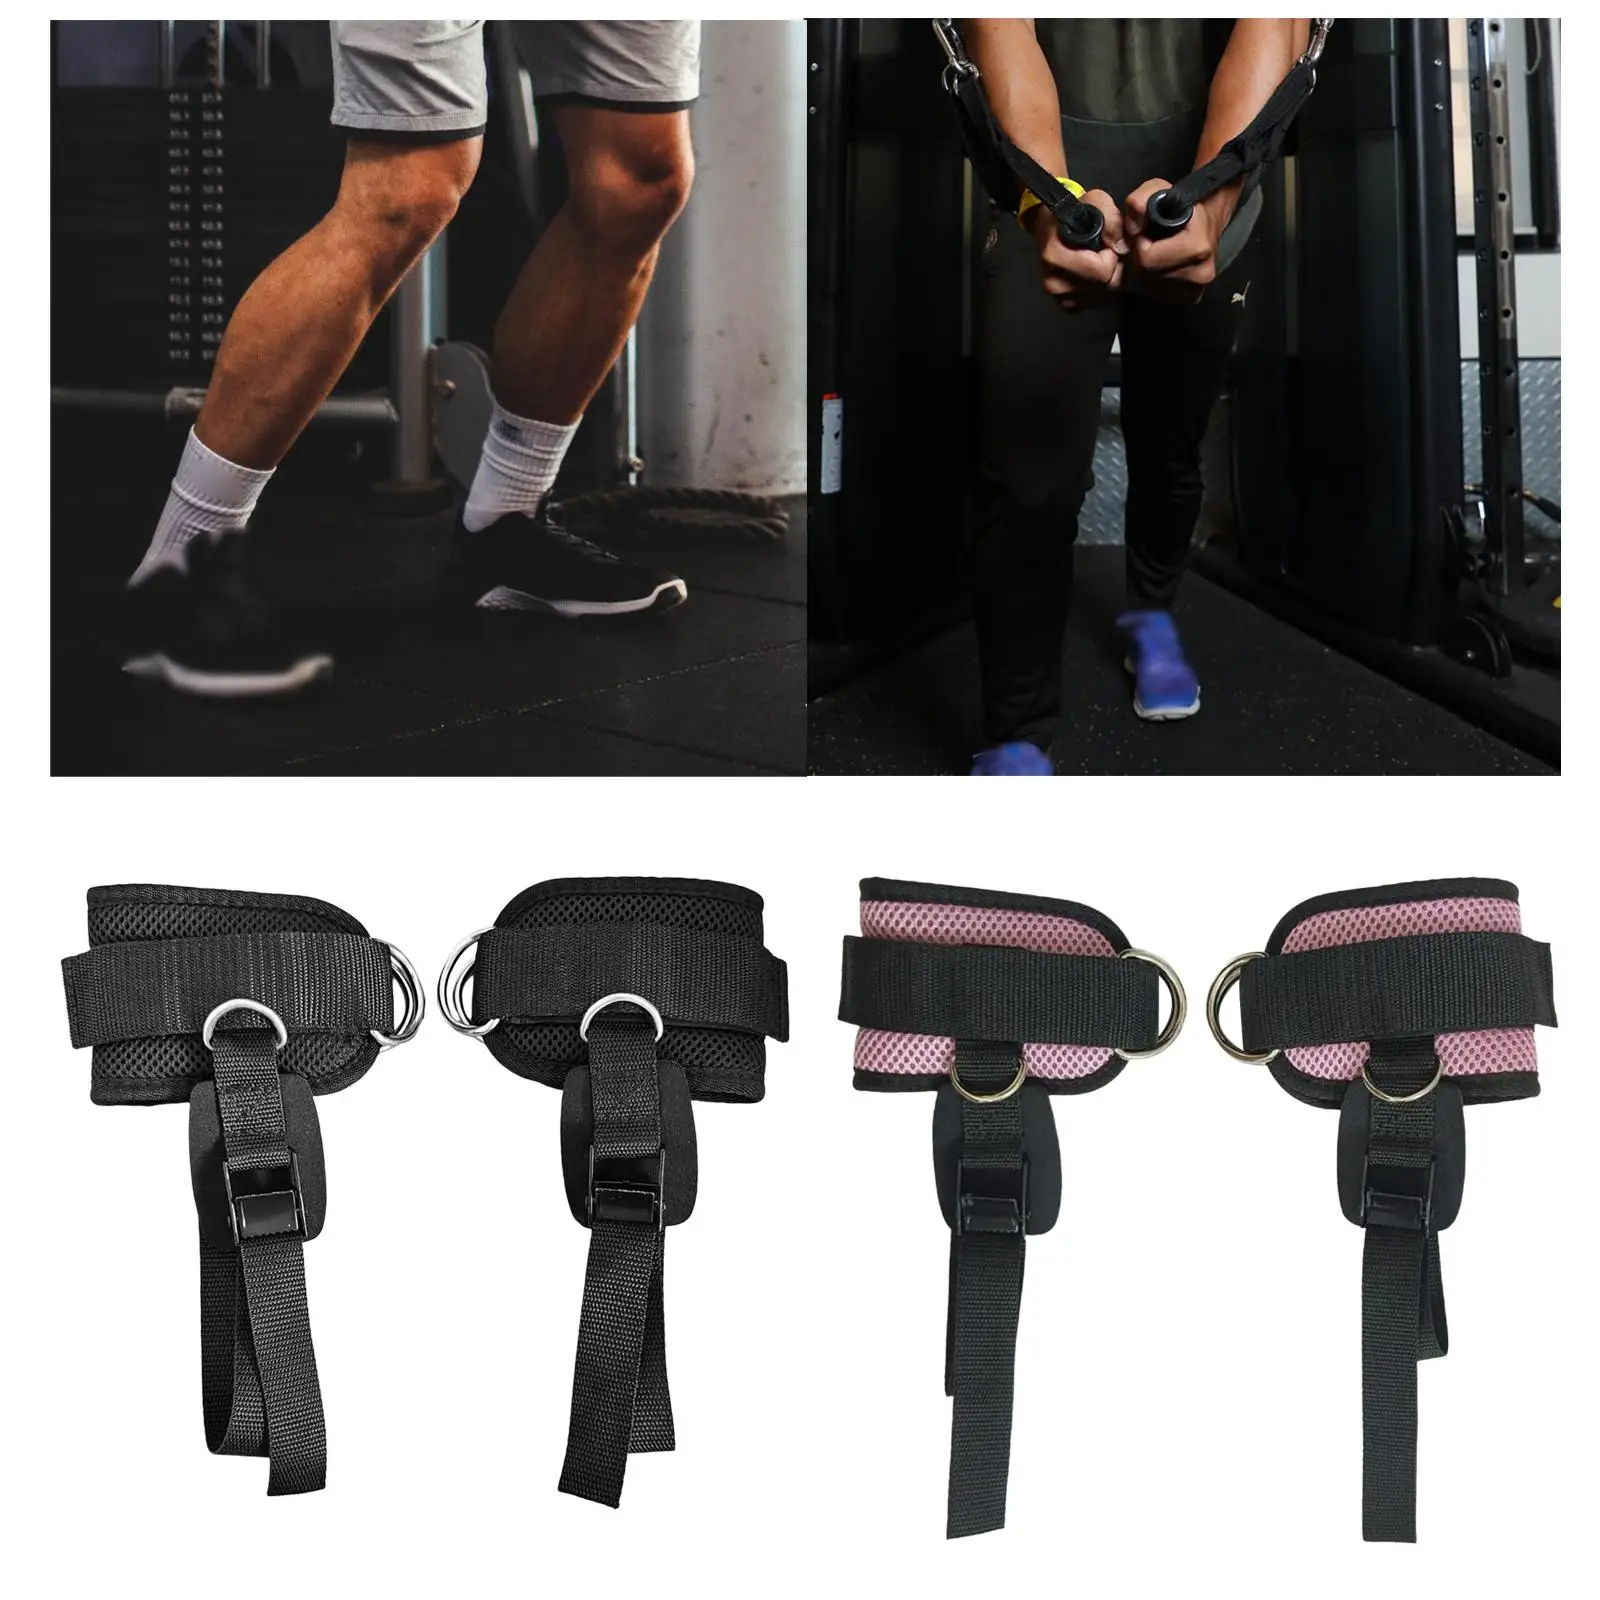 Adjustable Ankle Straps Pedal Rope Glute Ankle Cuffs Exercises Leg Strength Training Workout Ankle Strap Gym Fitness Equipment